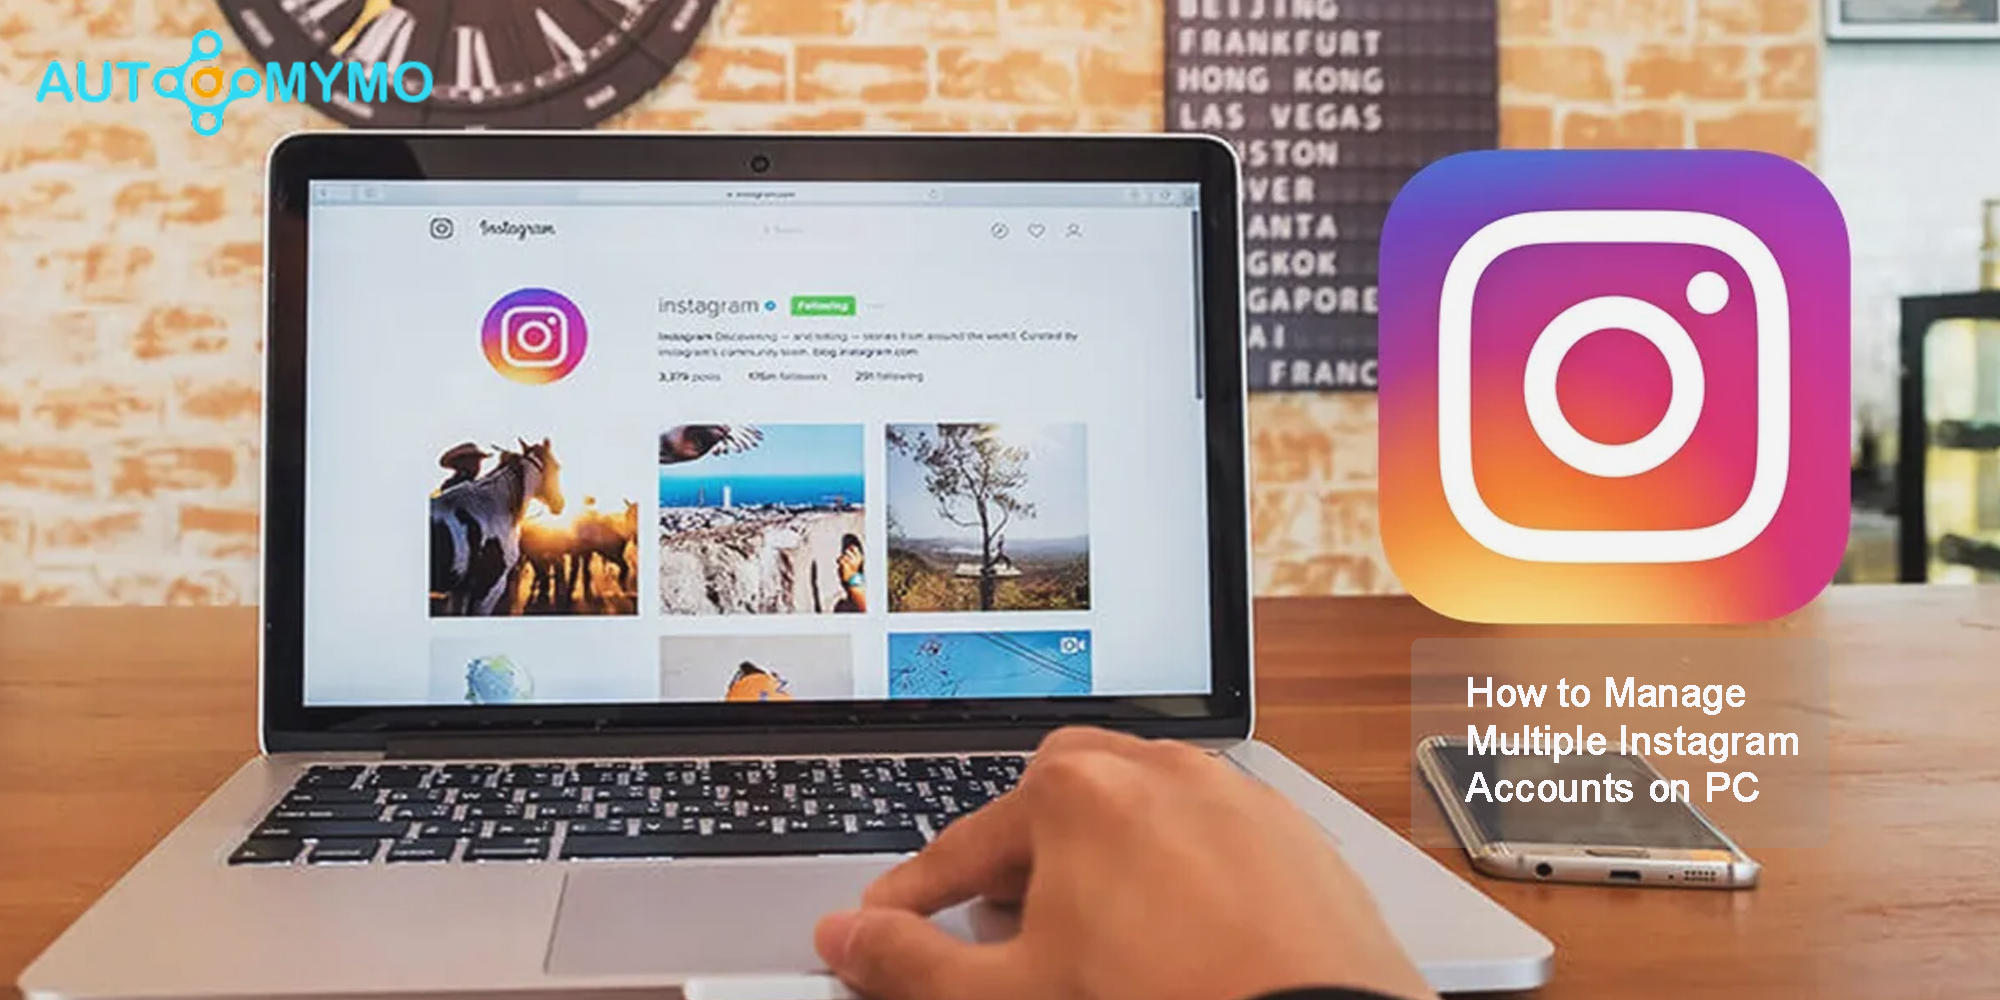 Manage Multiple Instagram Accounts on PC